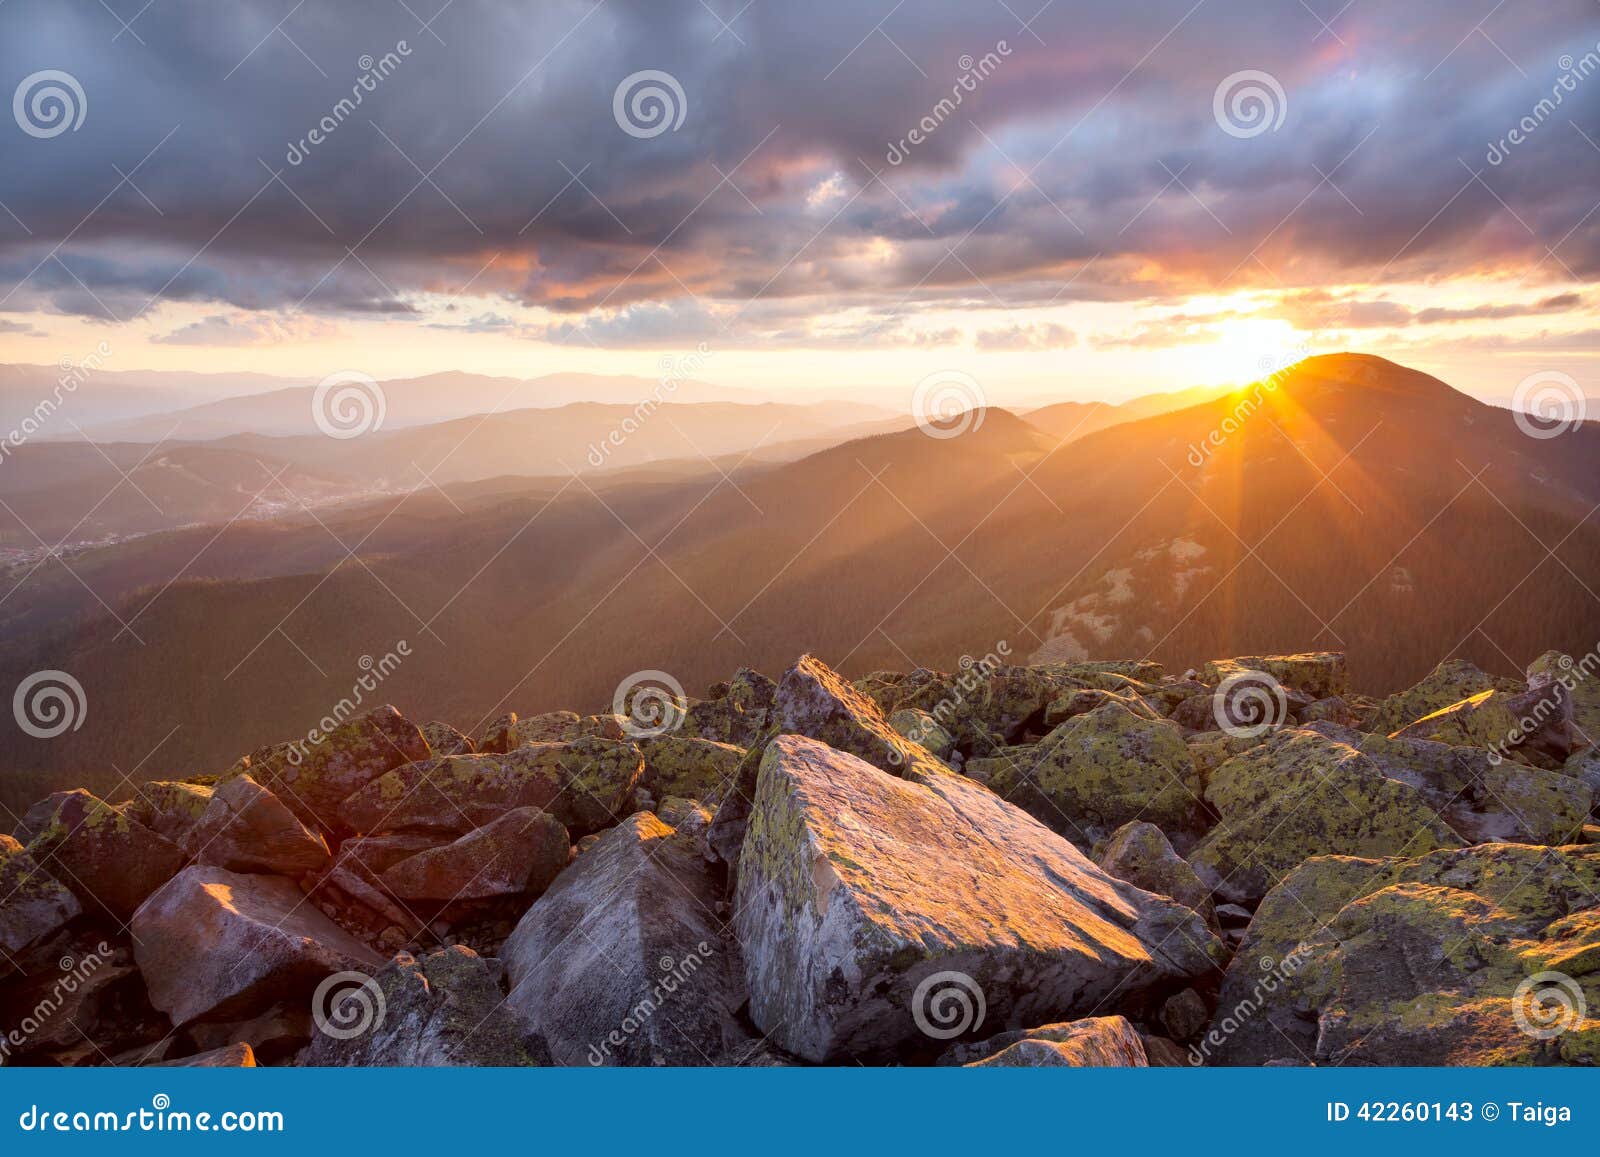 majestic sunset in the mountains landscape. dramatic sky and col